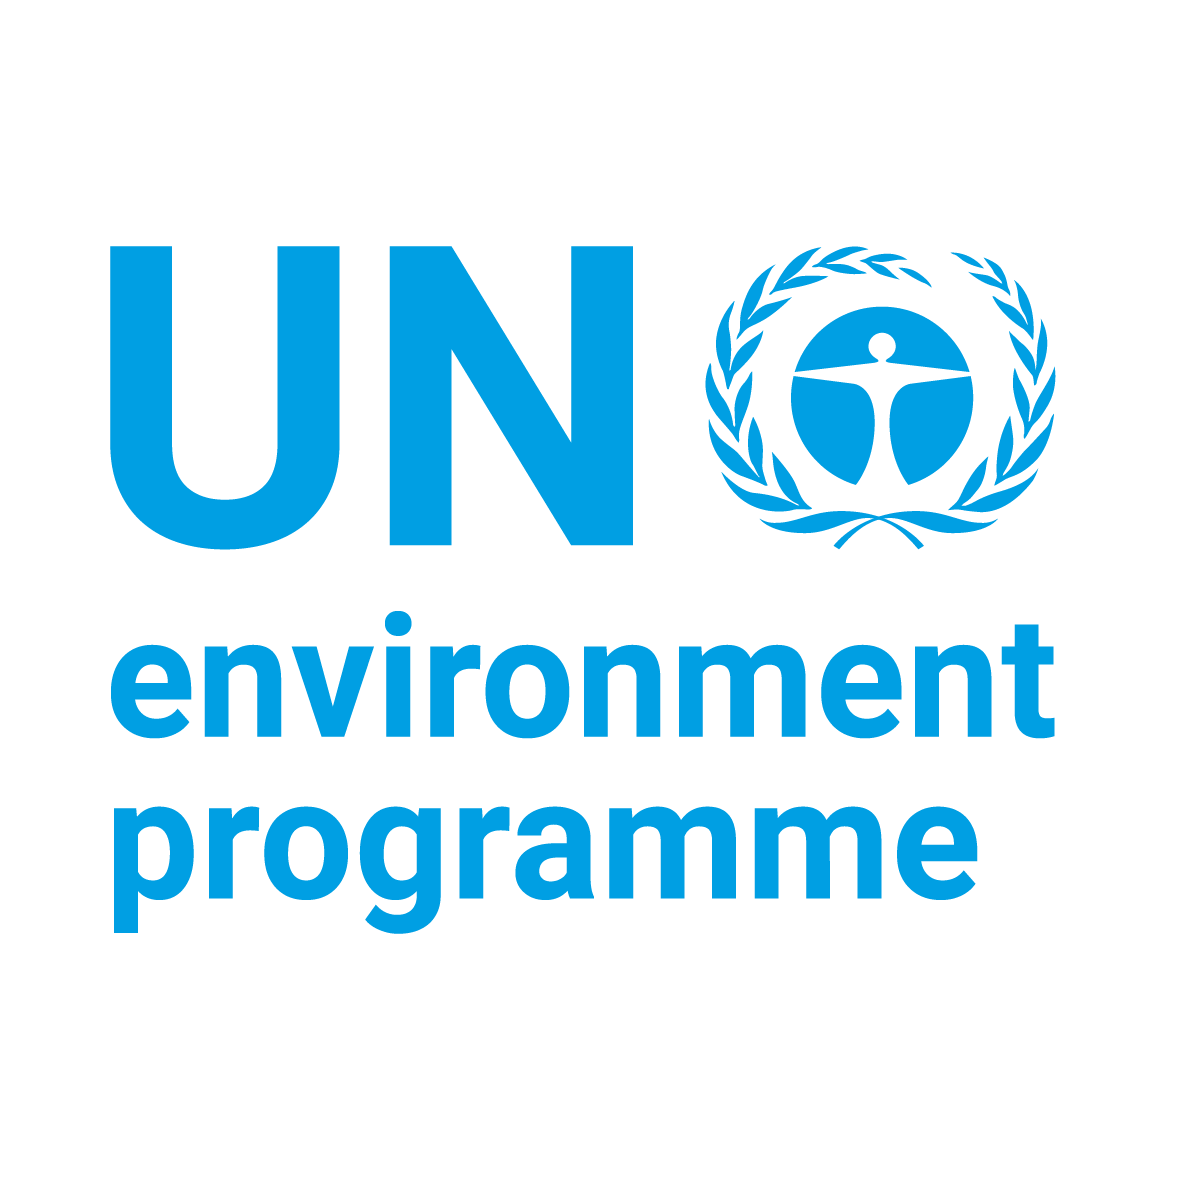 Logo of UNEP : a blue angel surrounded by laurel wreath